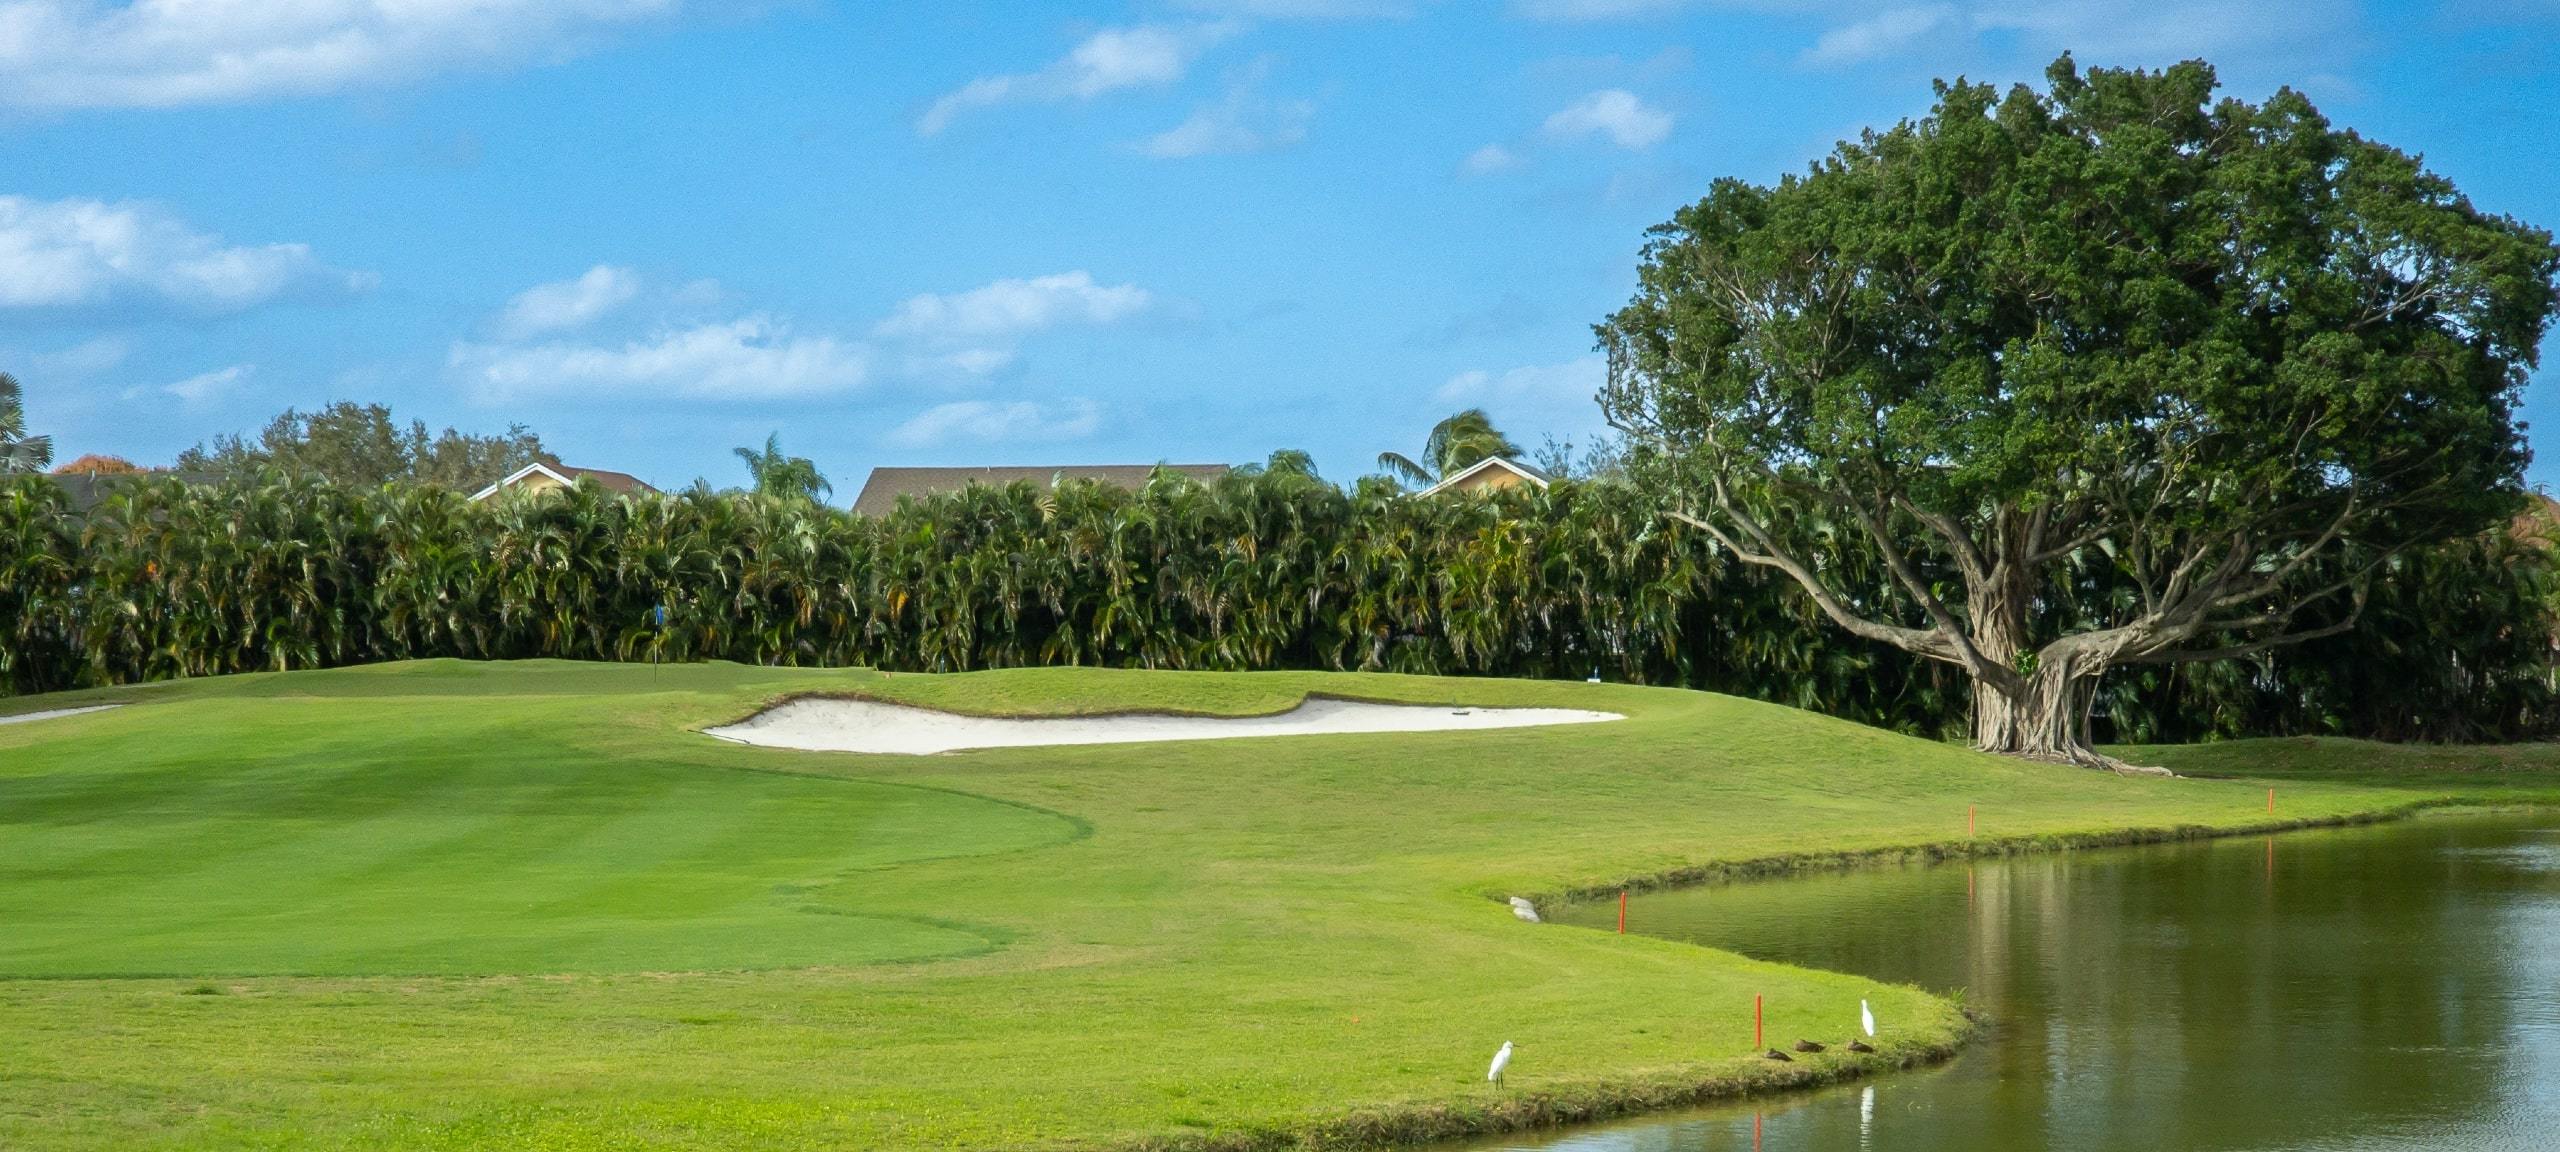 Central Florida area golf course with rolling green hills and blue sky